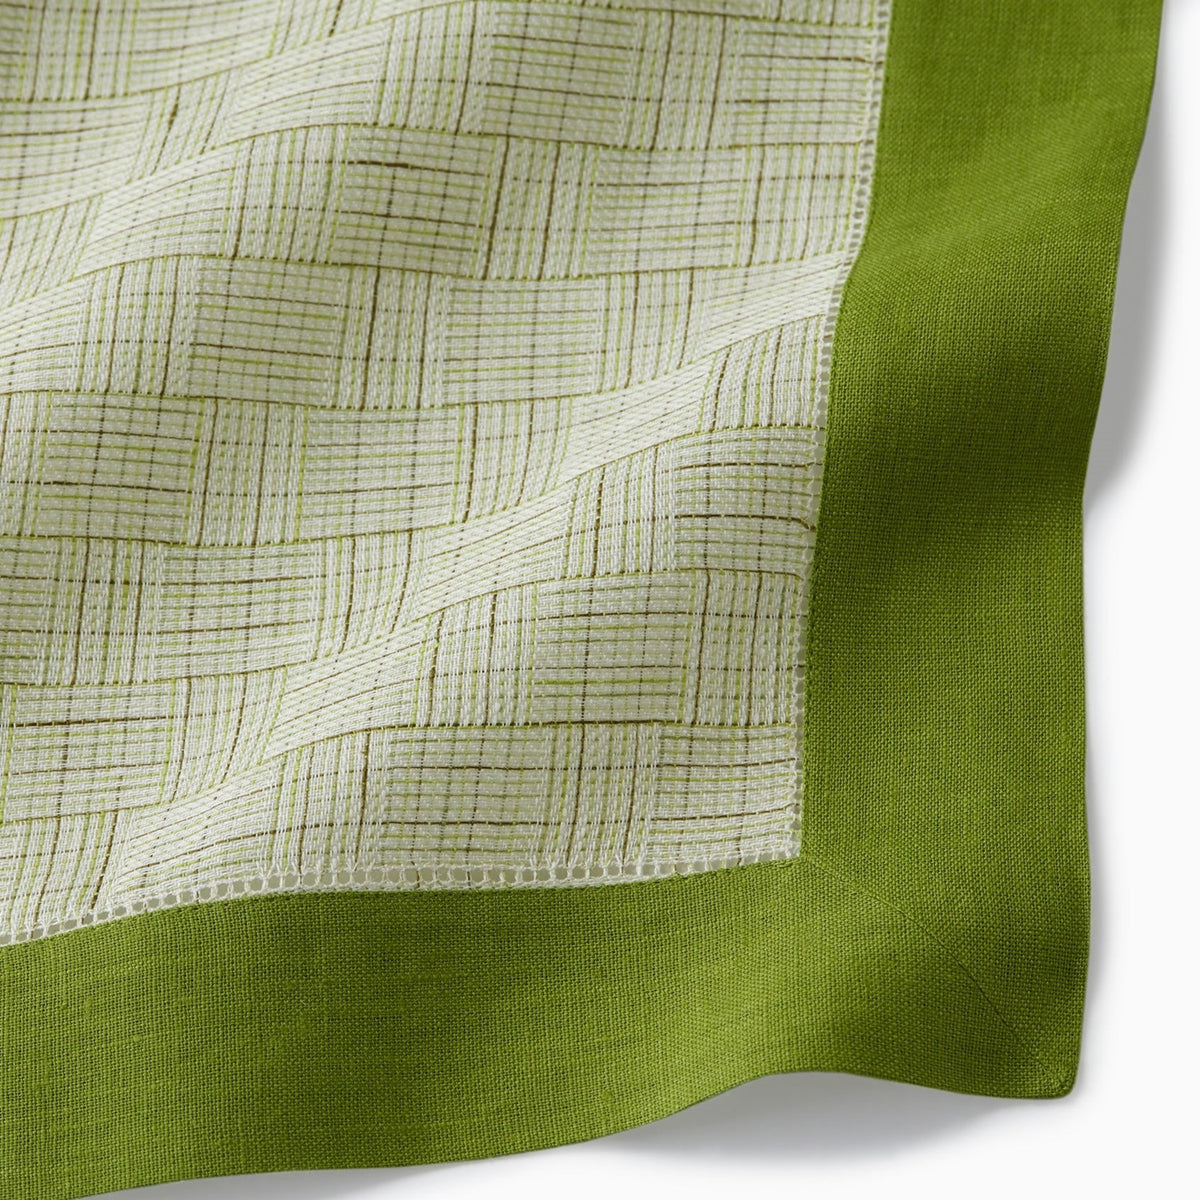 Swatch Sample of Sferra Mikelina Table Linens in Color Fern